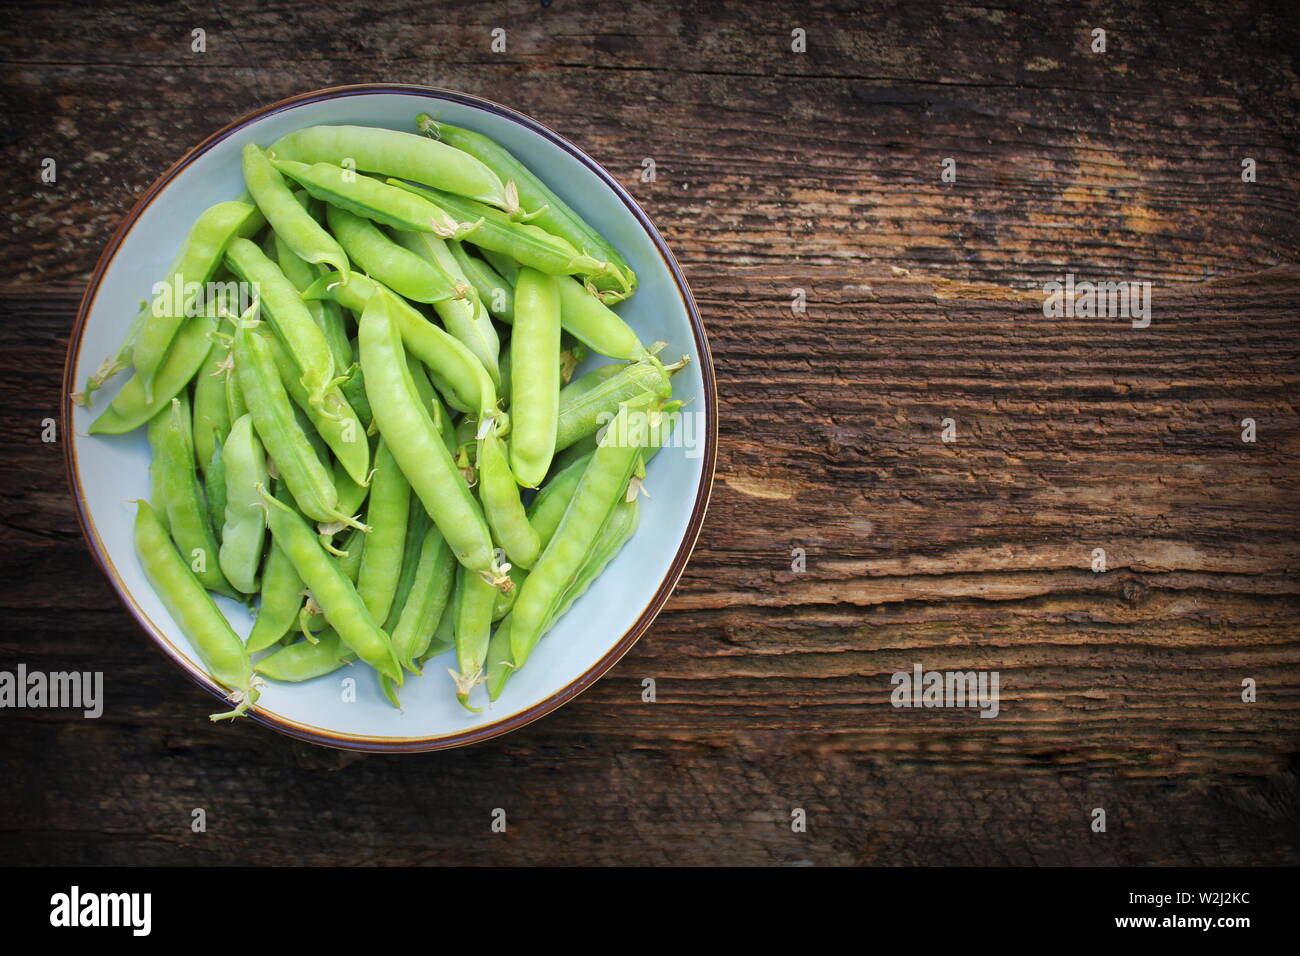 Green peas in bowl on wooden table background. Top view Stock Photo